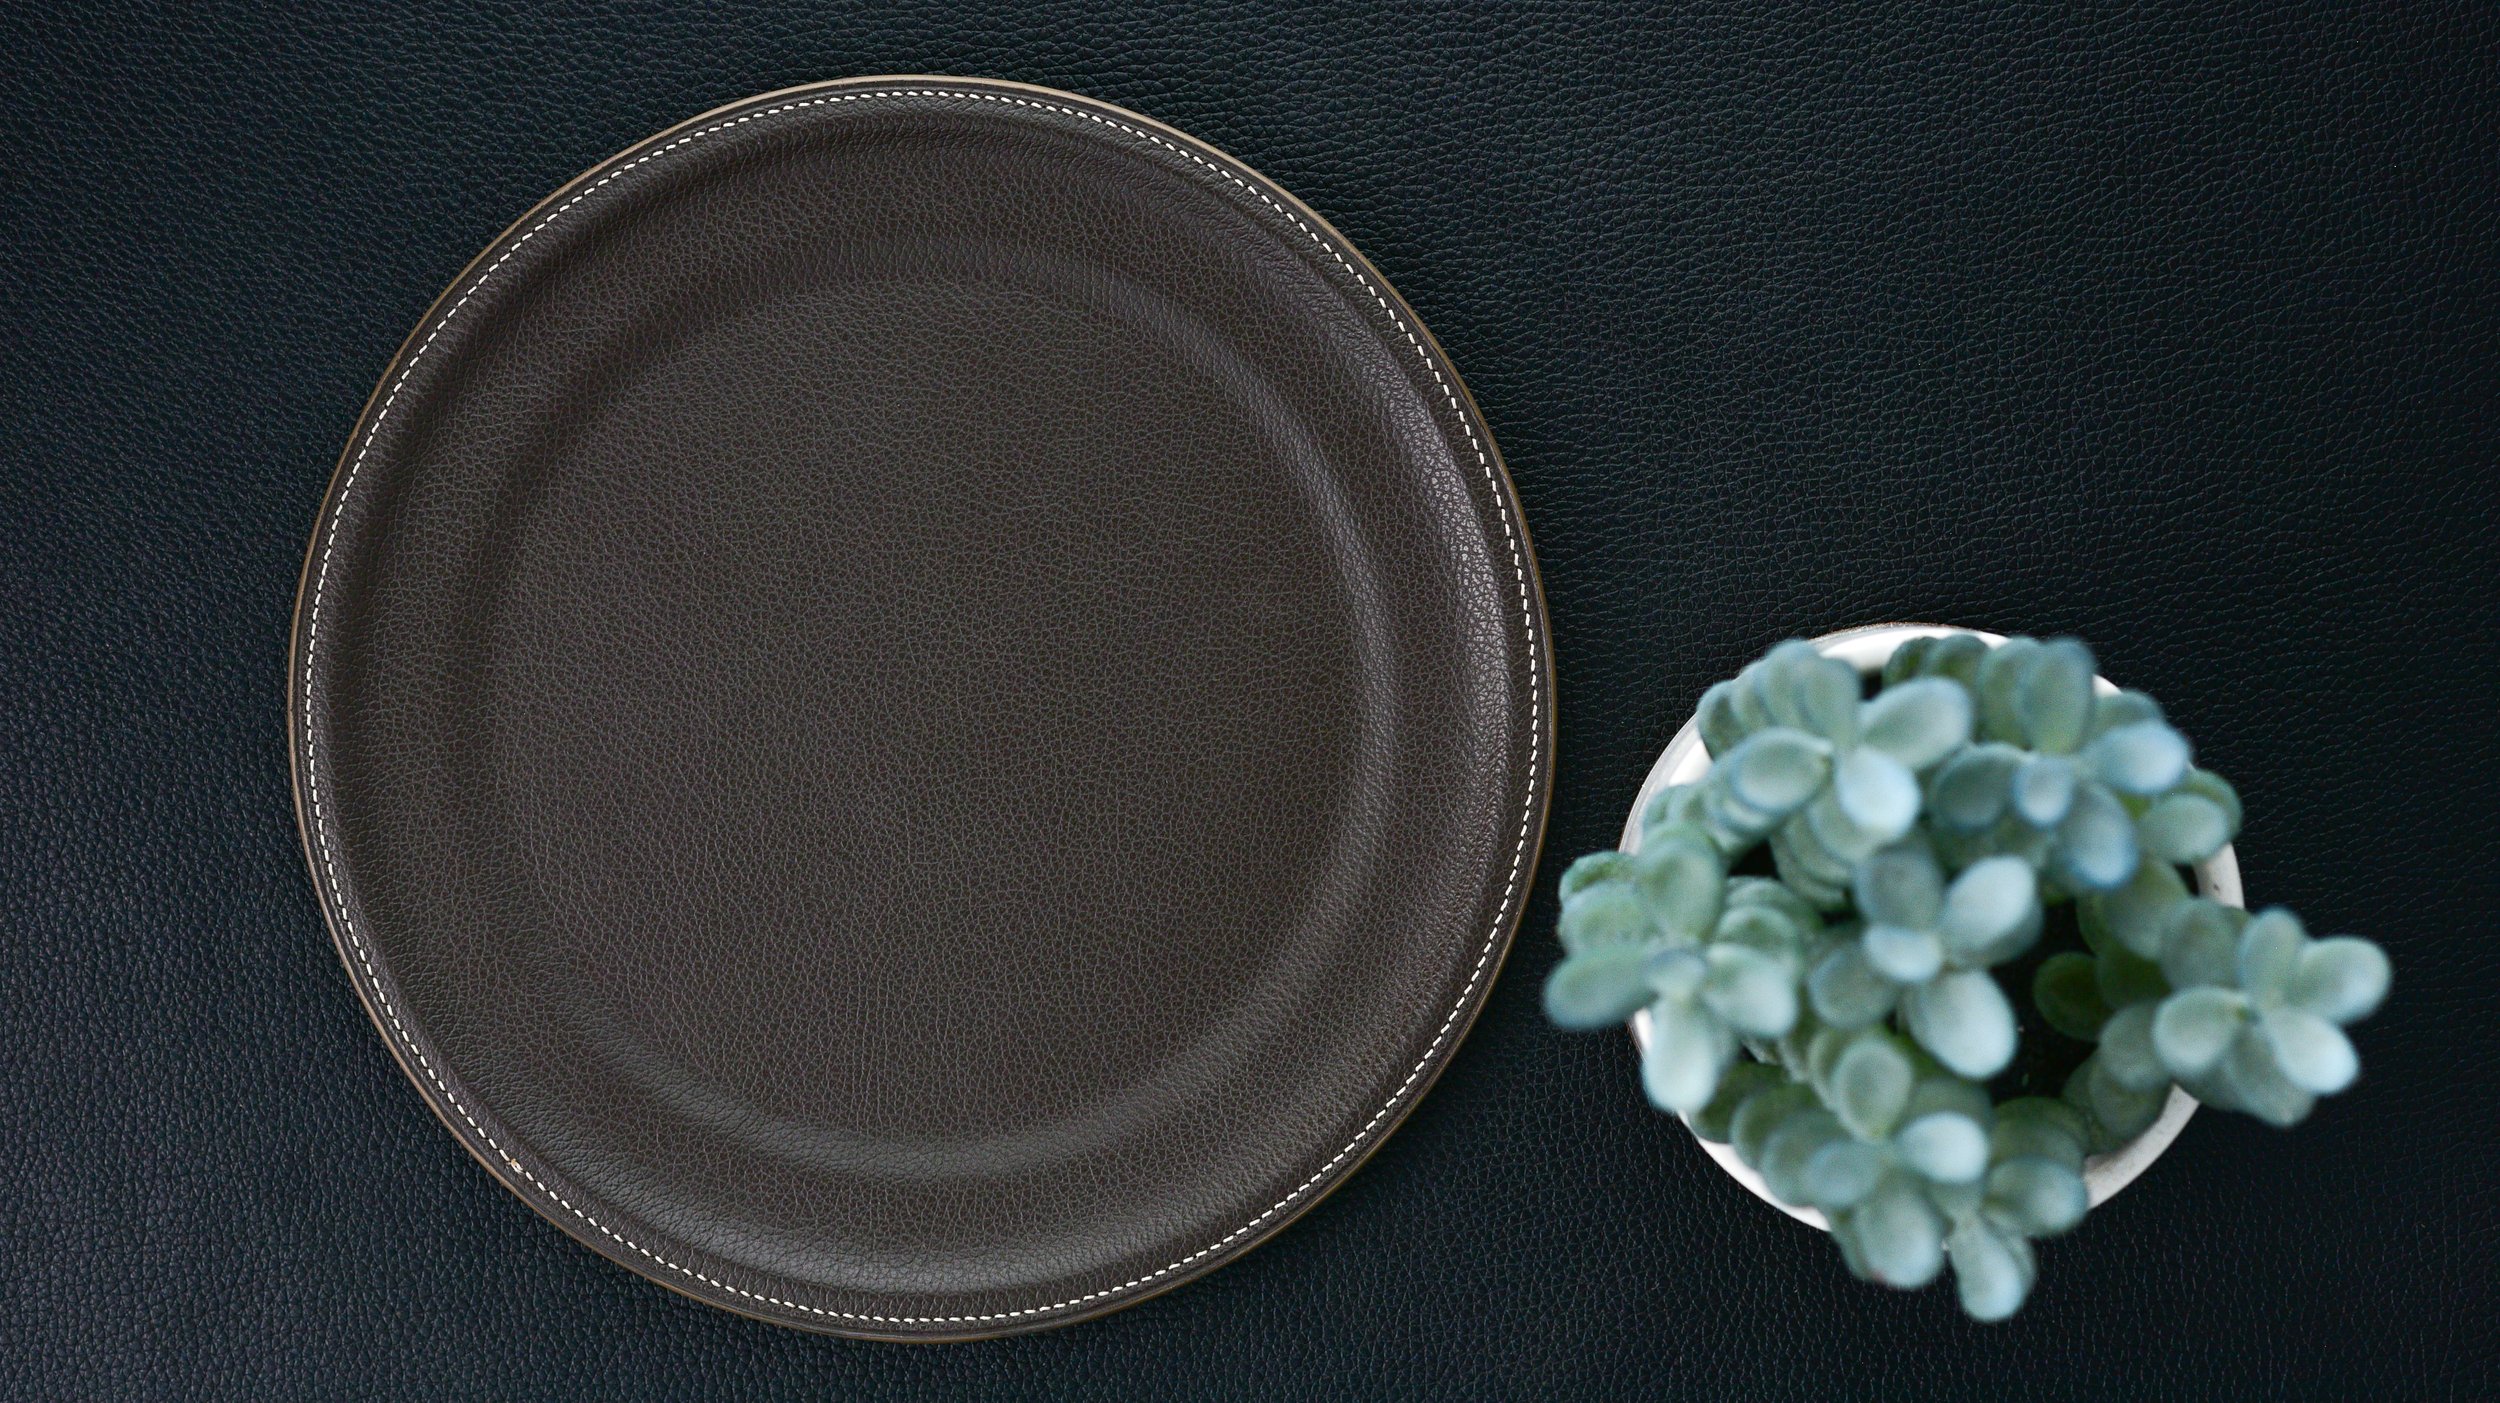 custom_leather_plate_leather_serving_tray_serving_plate_cocktail_tray_darktaupe.jpg